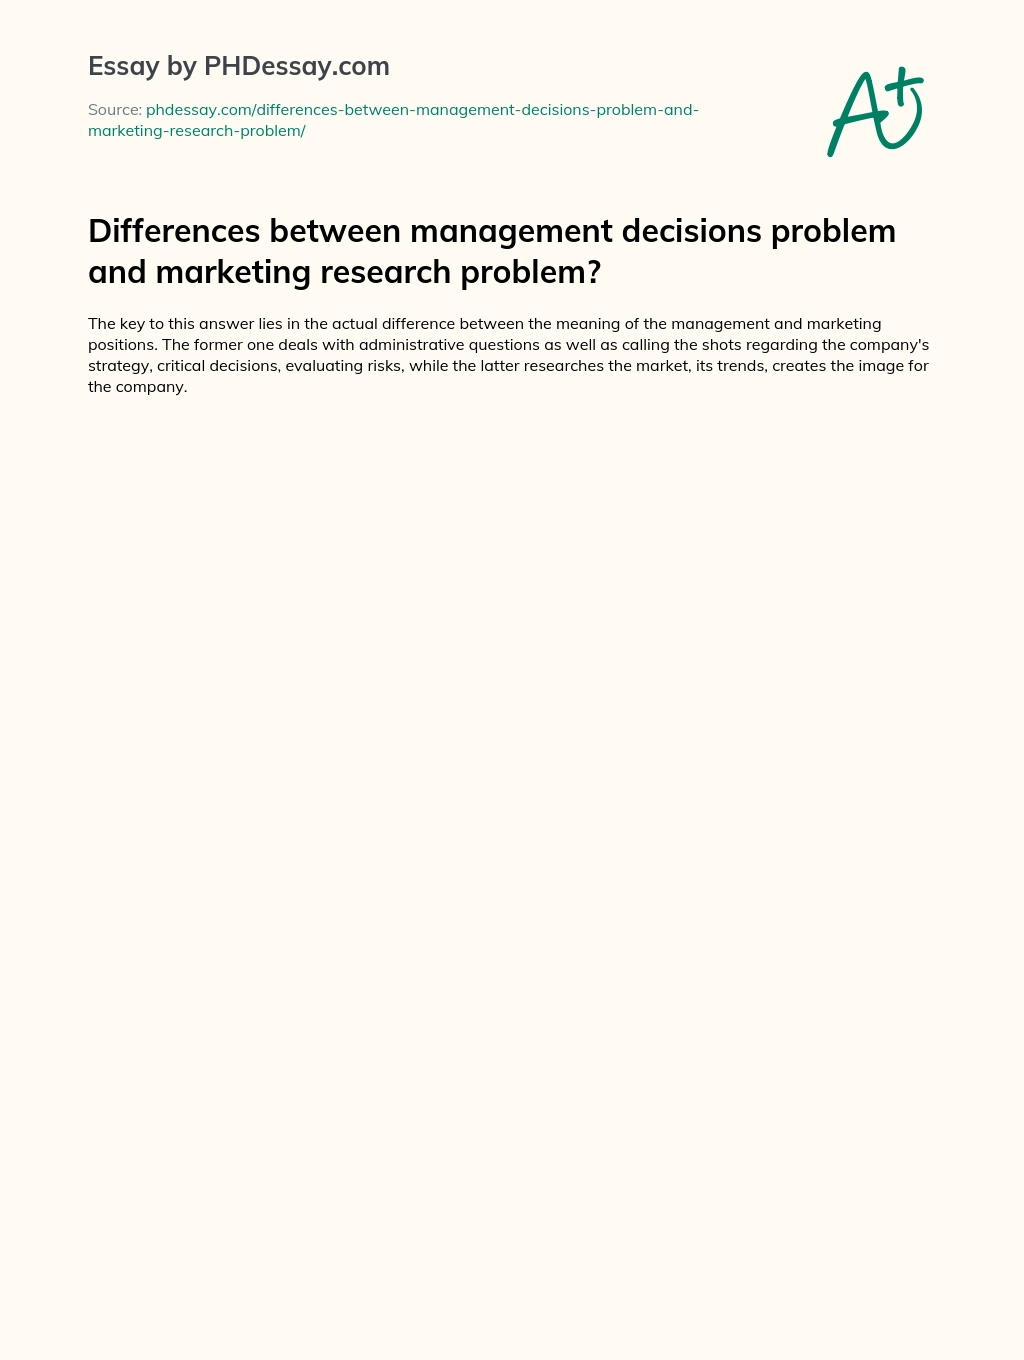 Differences between management decisions problem and marketing research problem? essay